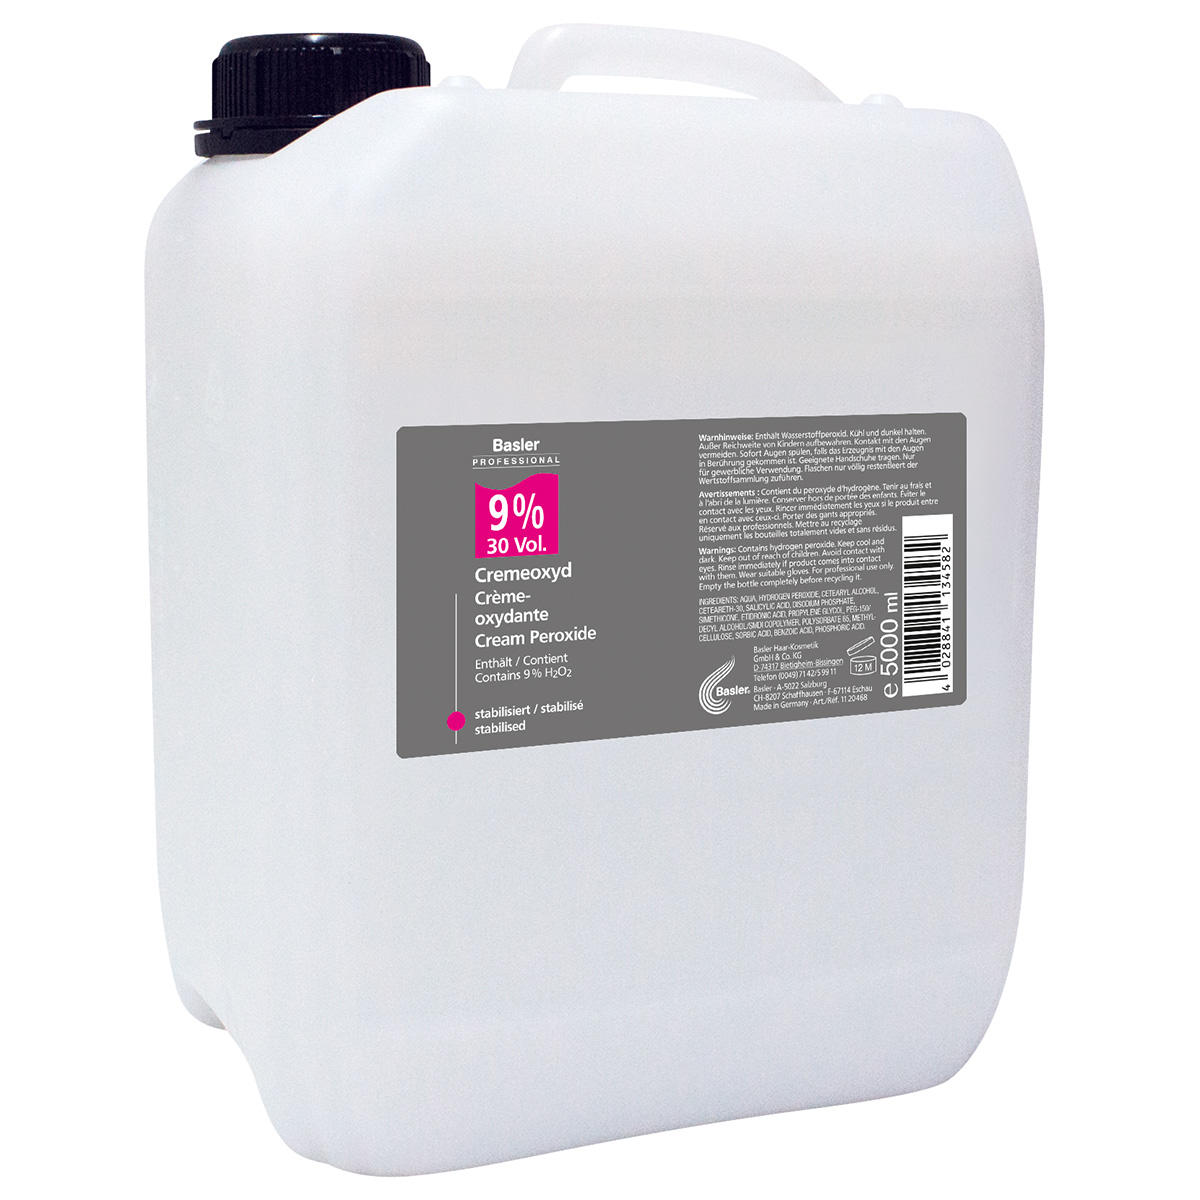 Basler Cremeoxyd 9 %, canister 5 liters - 1